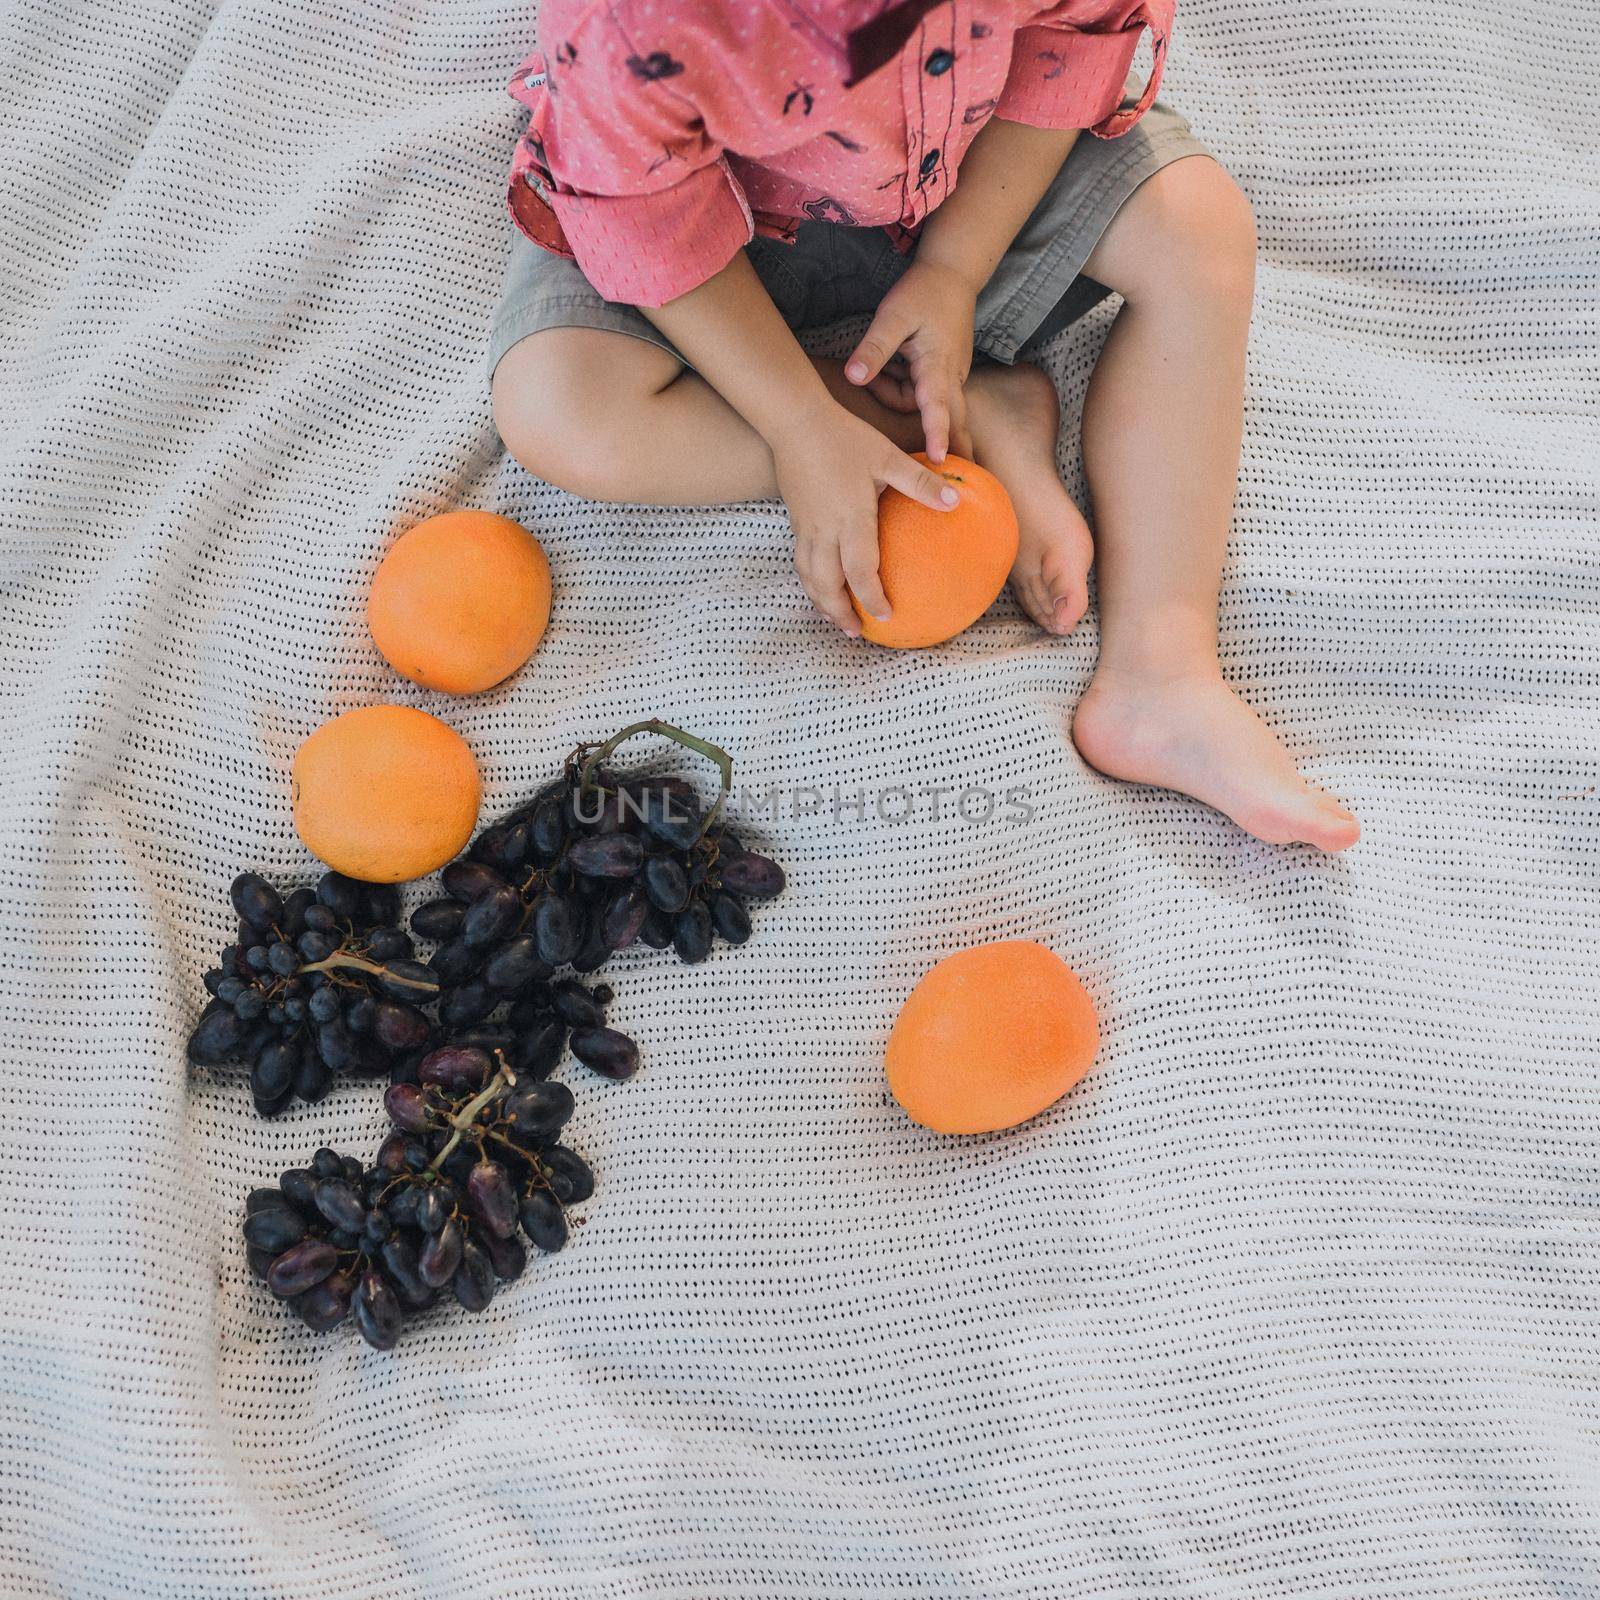 view from above. feet of a boy. holding a bright orange in his hands. Sits on a white bedspread. Picnic in the summer. huge grone of blue grapes.